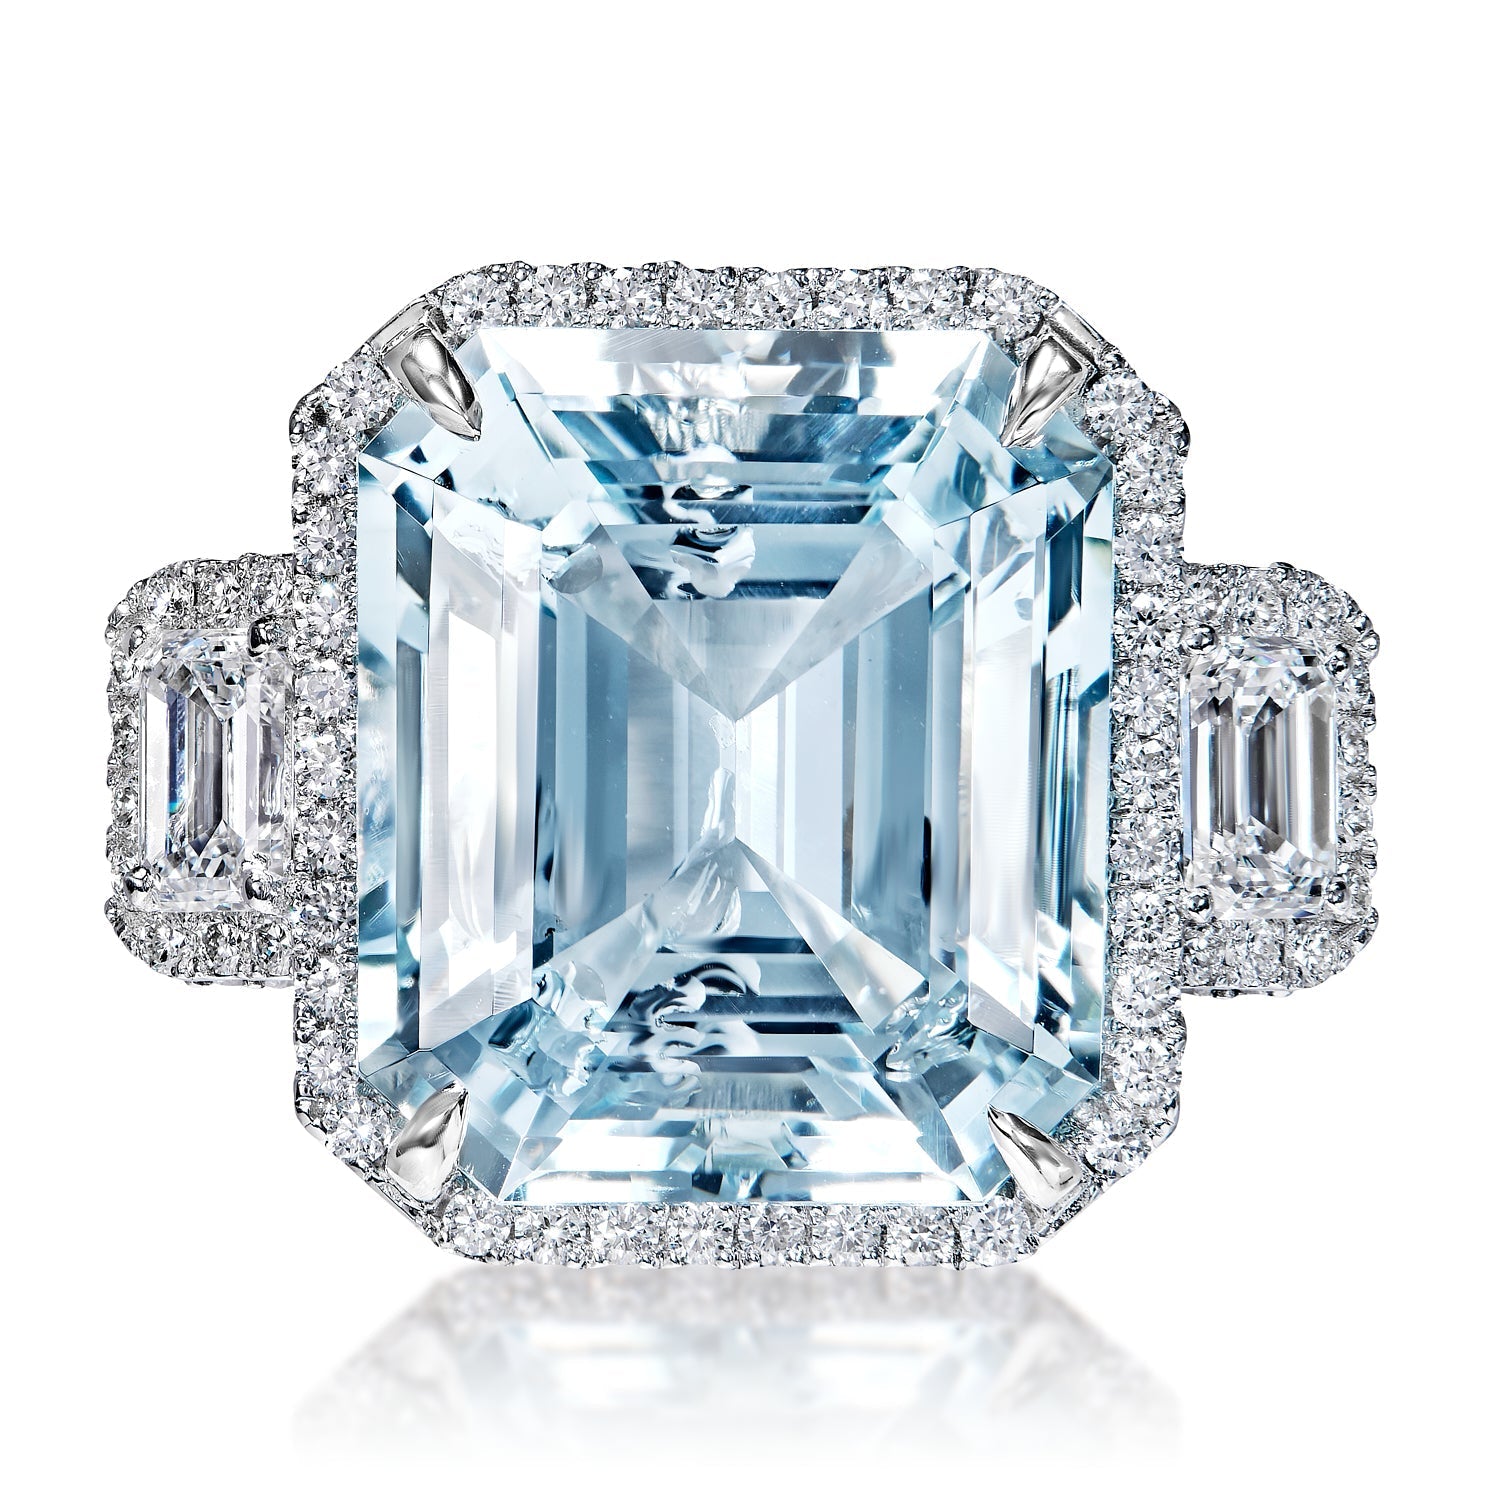 Aquas are forever: Why you should choose an Aquamarine ring – Fenton